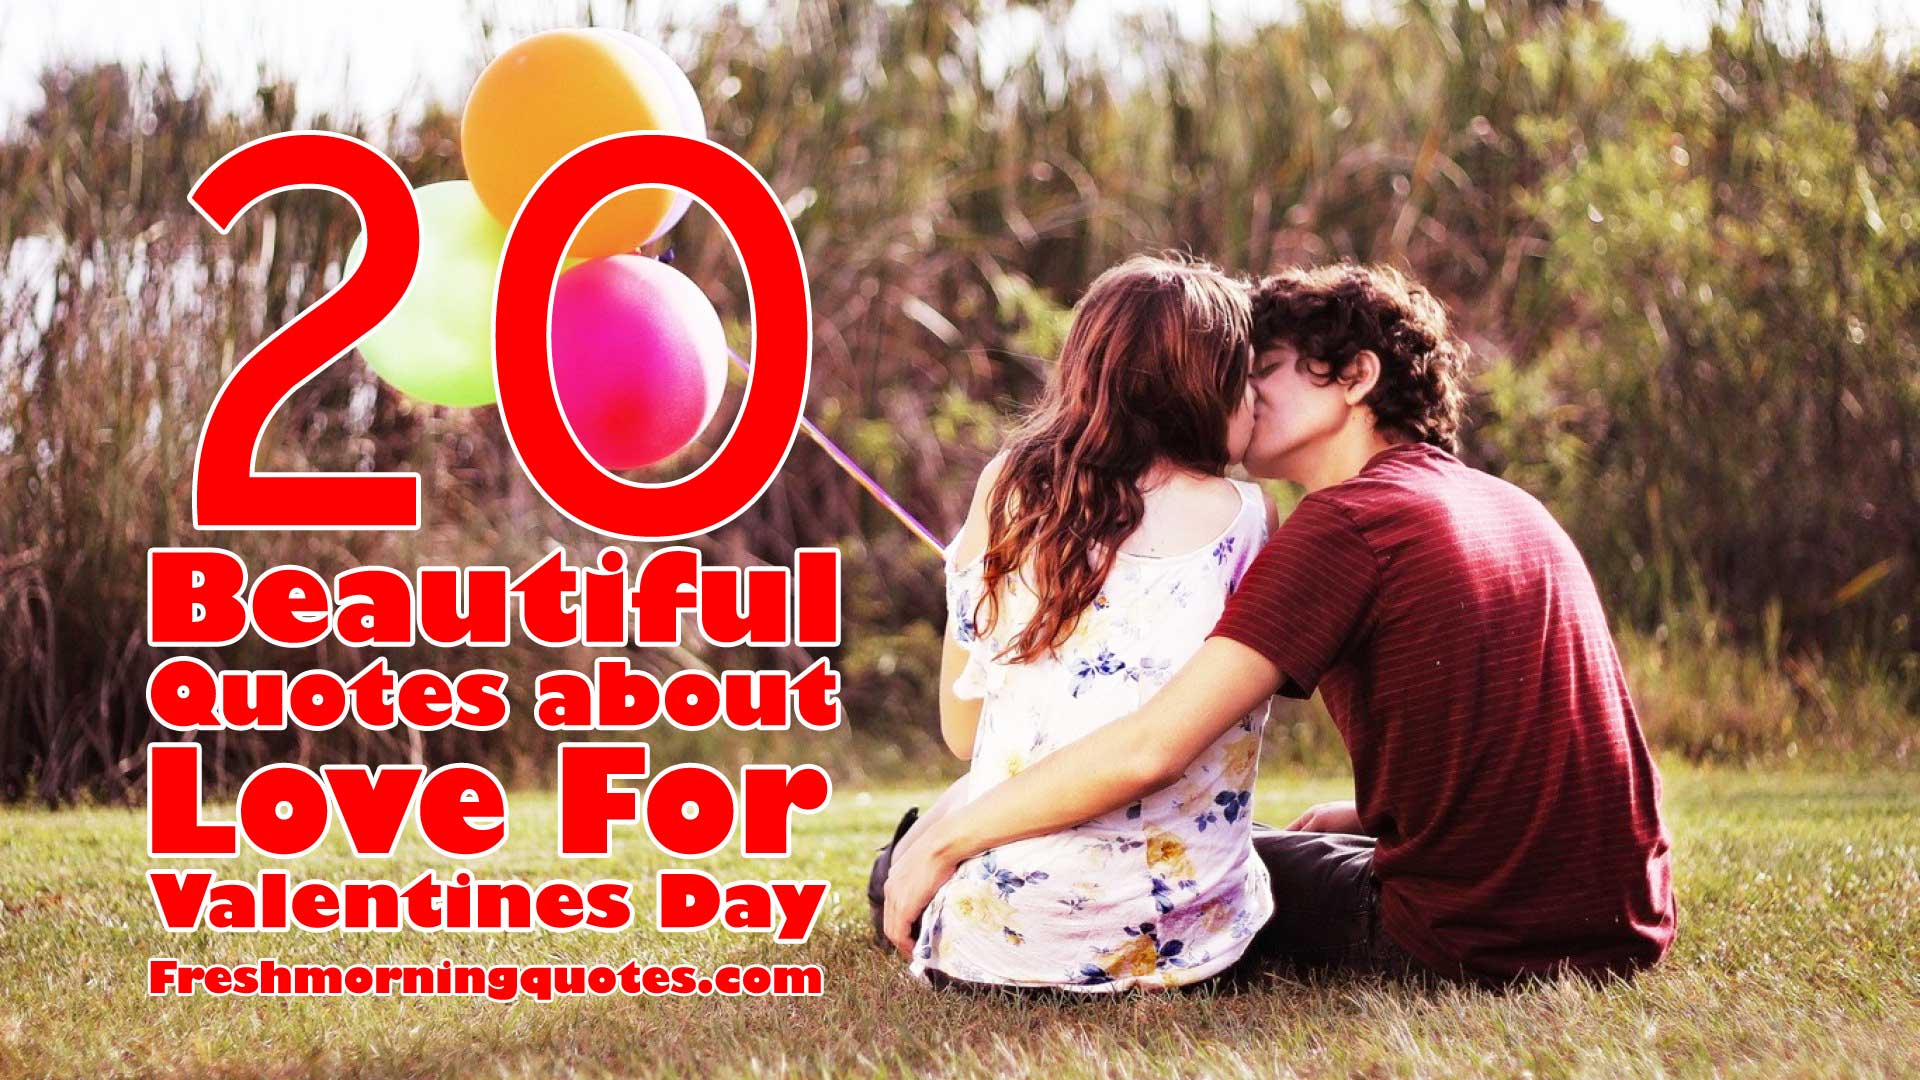 20 Beautiful Quotes about Love for Valentines Day